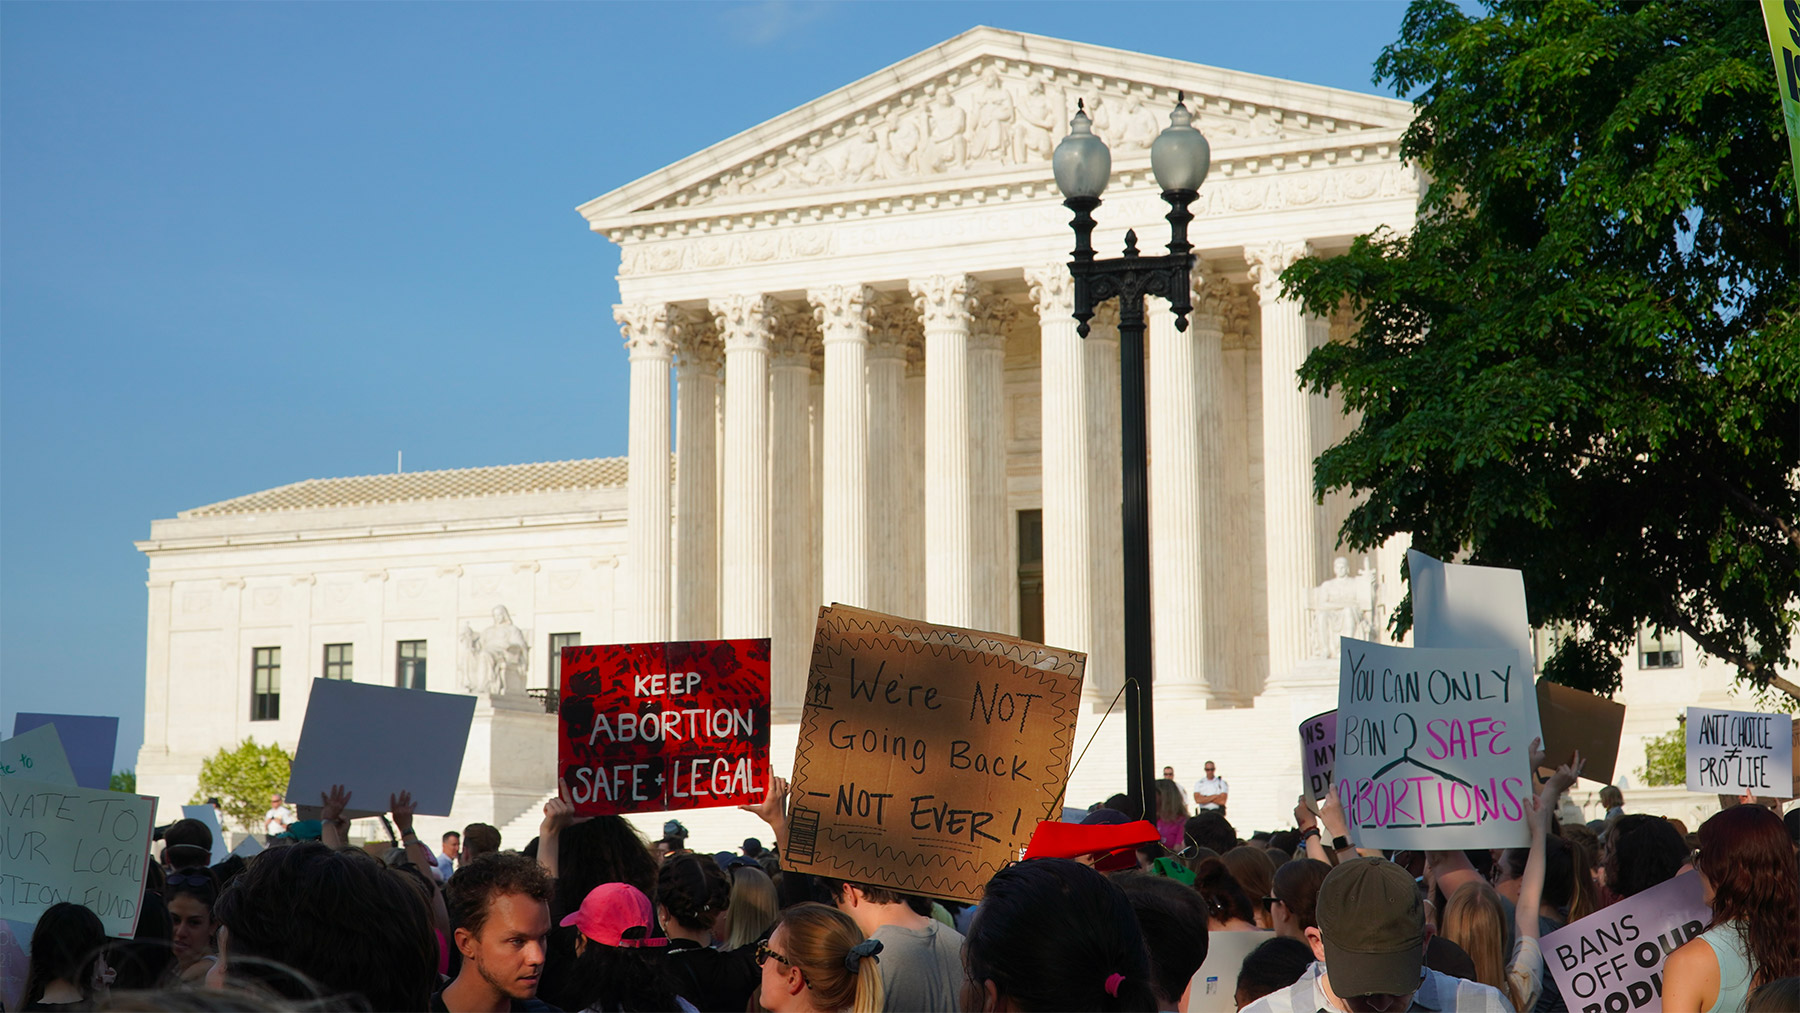 Protestors in front of the Supreme Court on May 3, after a leaked draft opinion showed the court was preparing to overturn Roe v. Wade and push women's rights back by half a century.